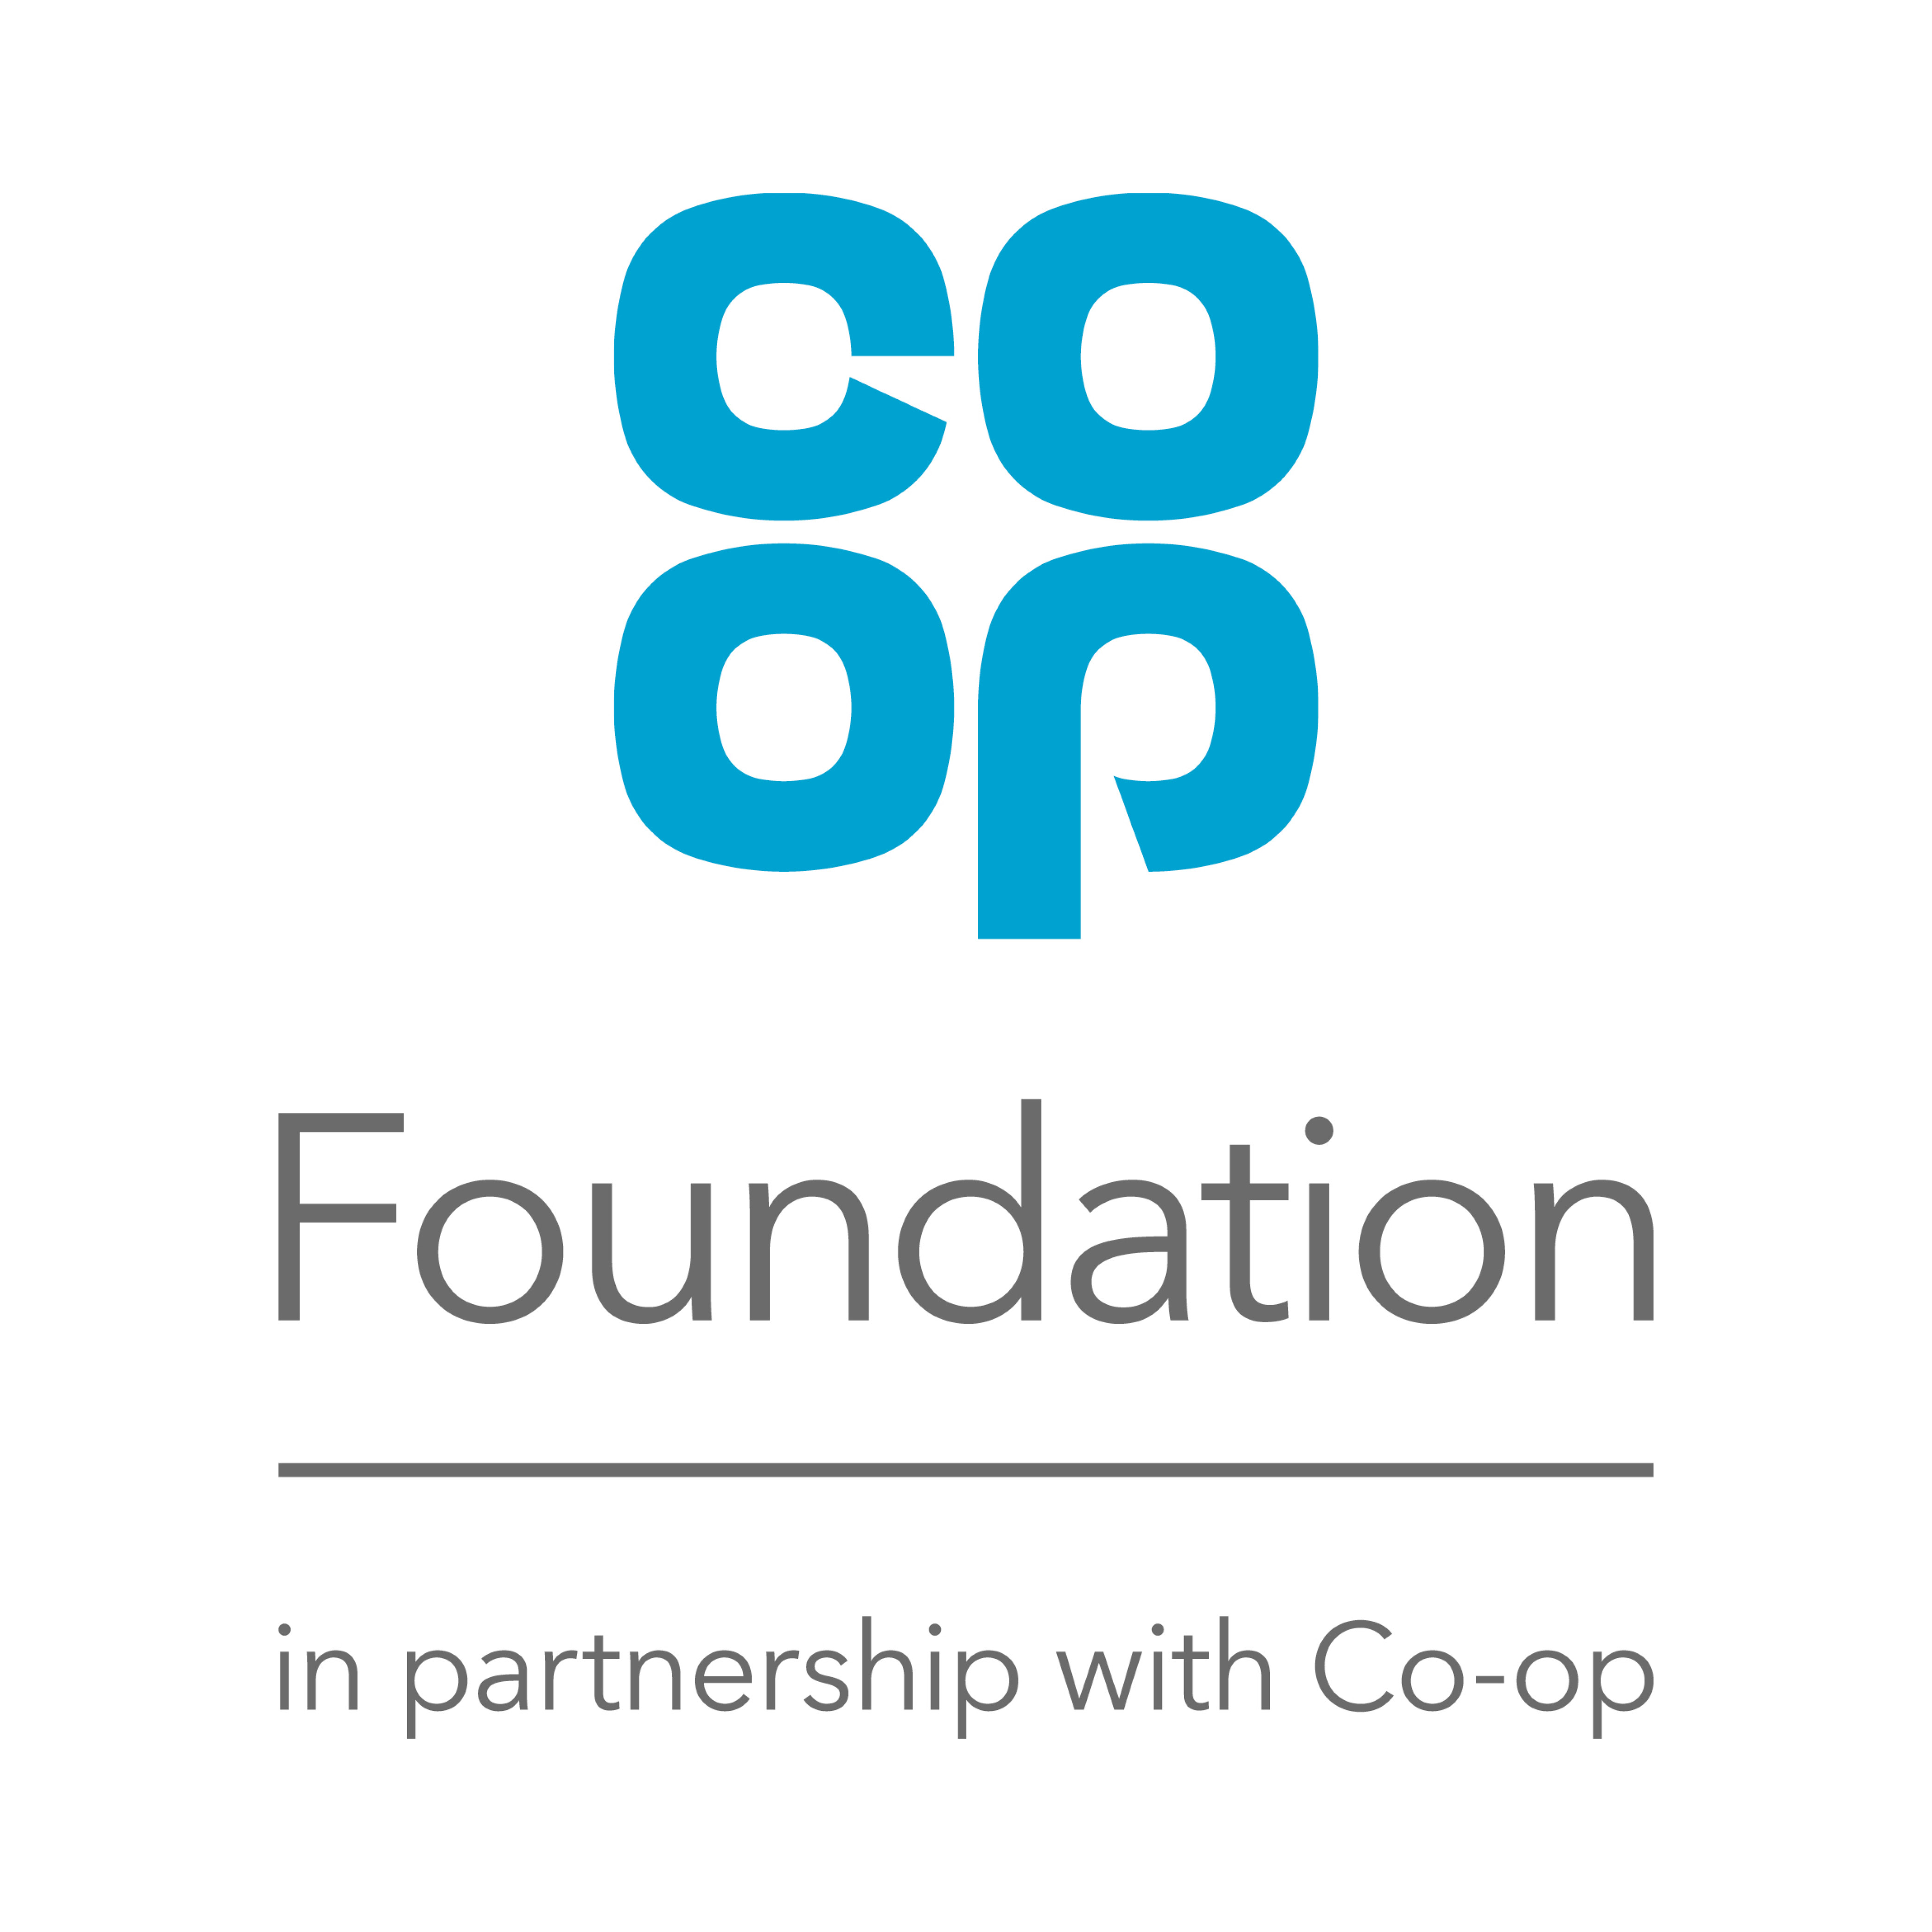 Co-op Foundation in partnership with Co-op logo lock up